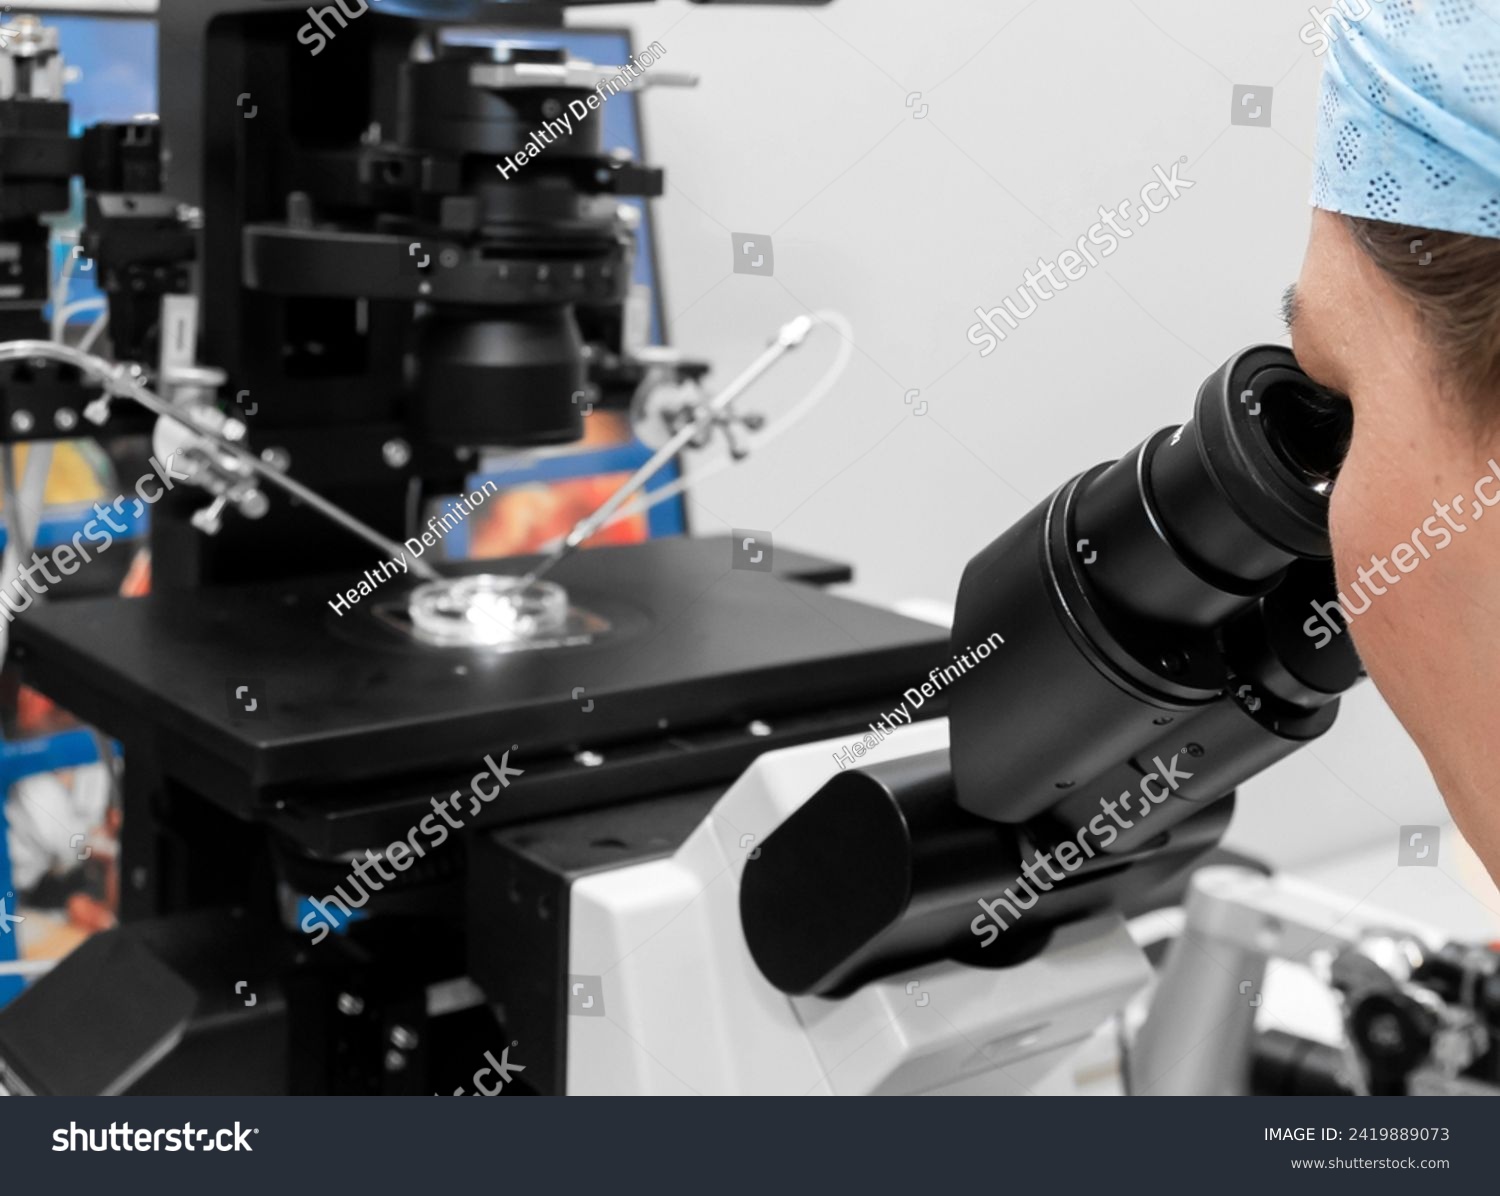 Embryologist adding sperm to egg in laboratory of reproductive clinic. in vitro fertilization, egg freezing. injects one sperm into each egg by microinjection. intracytoplasmic Sperm injection. IMSI #2419889073